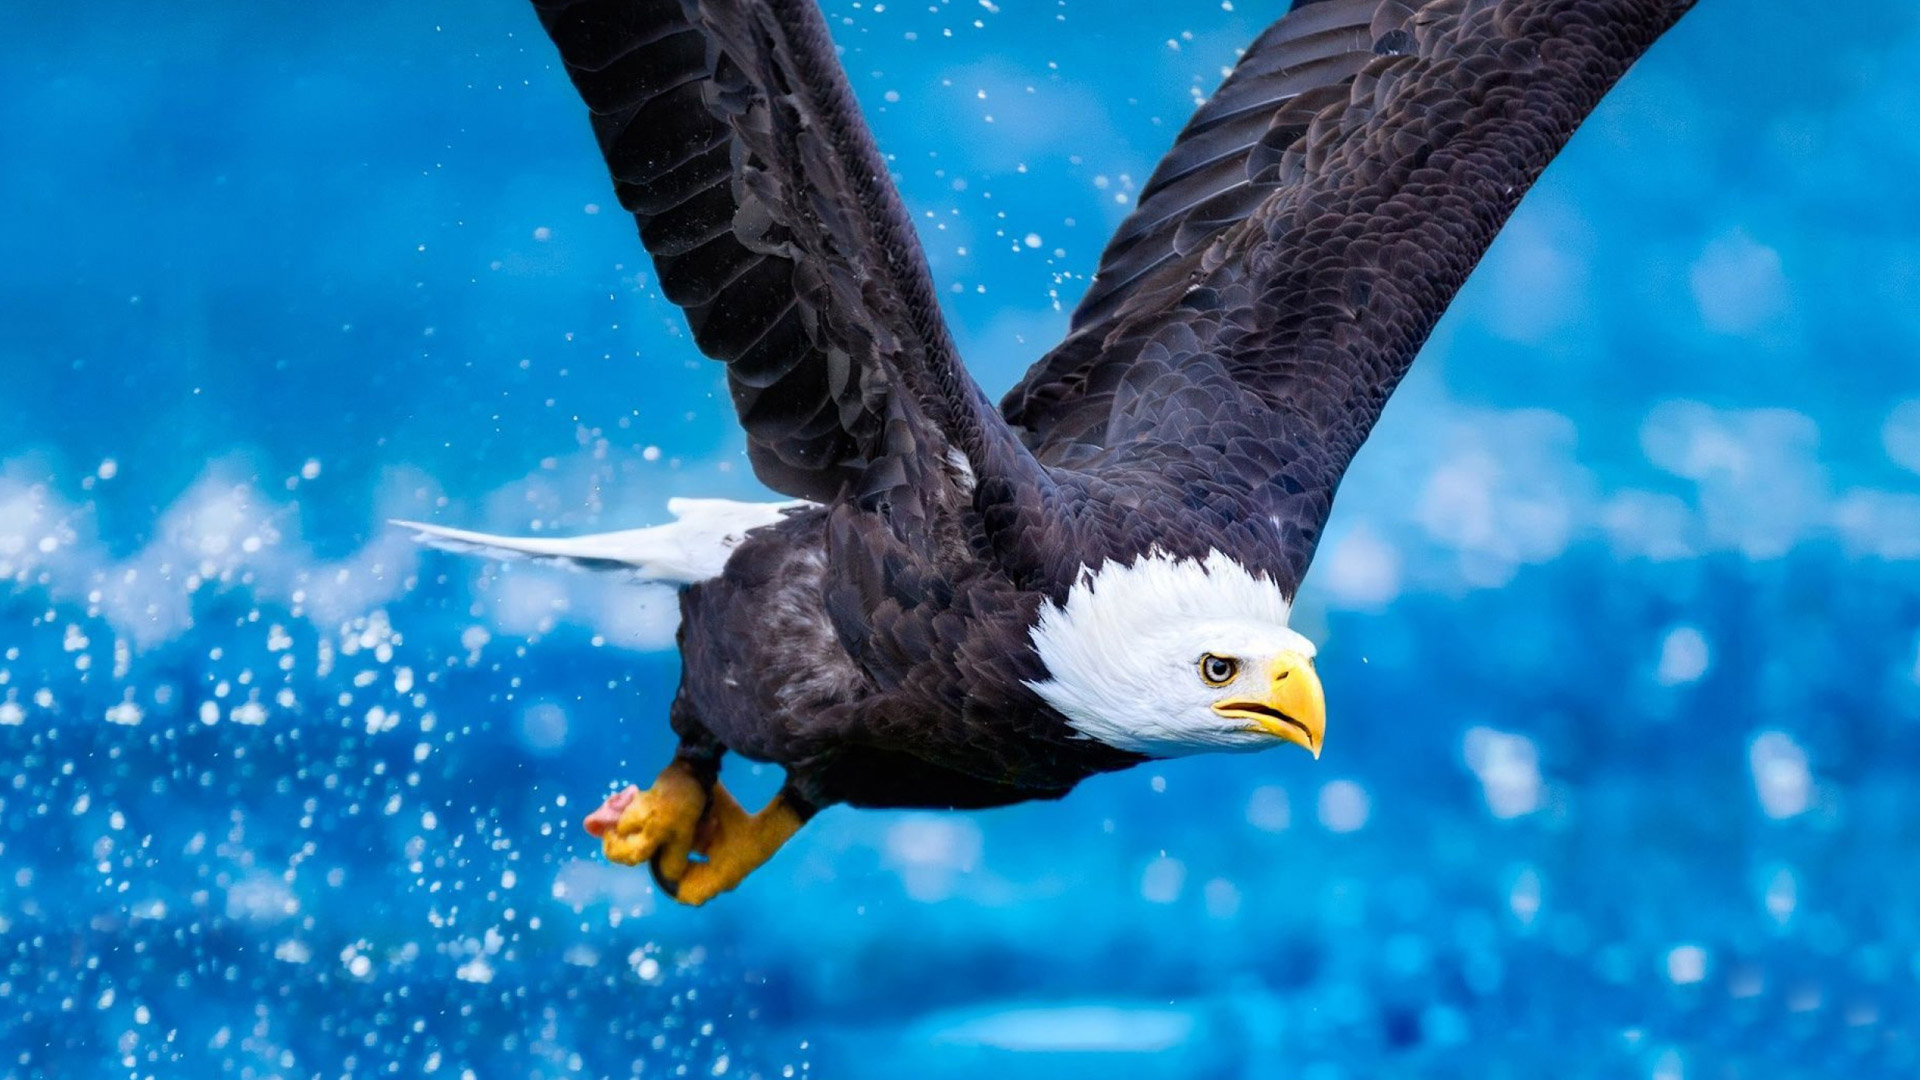 Flying Eagle HD Wallpapers HD Wallpapers